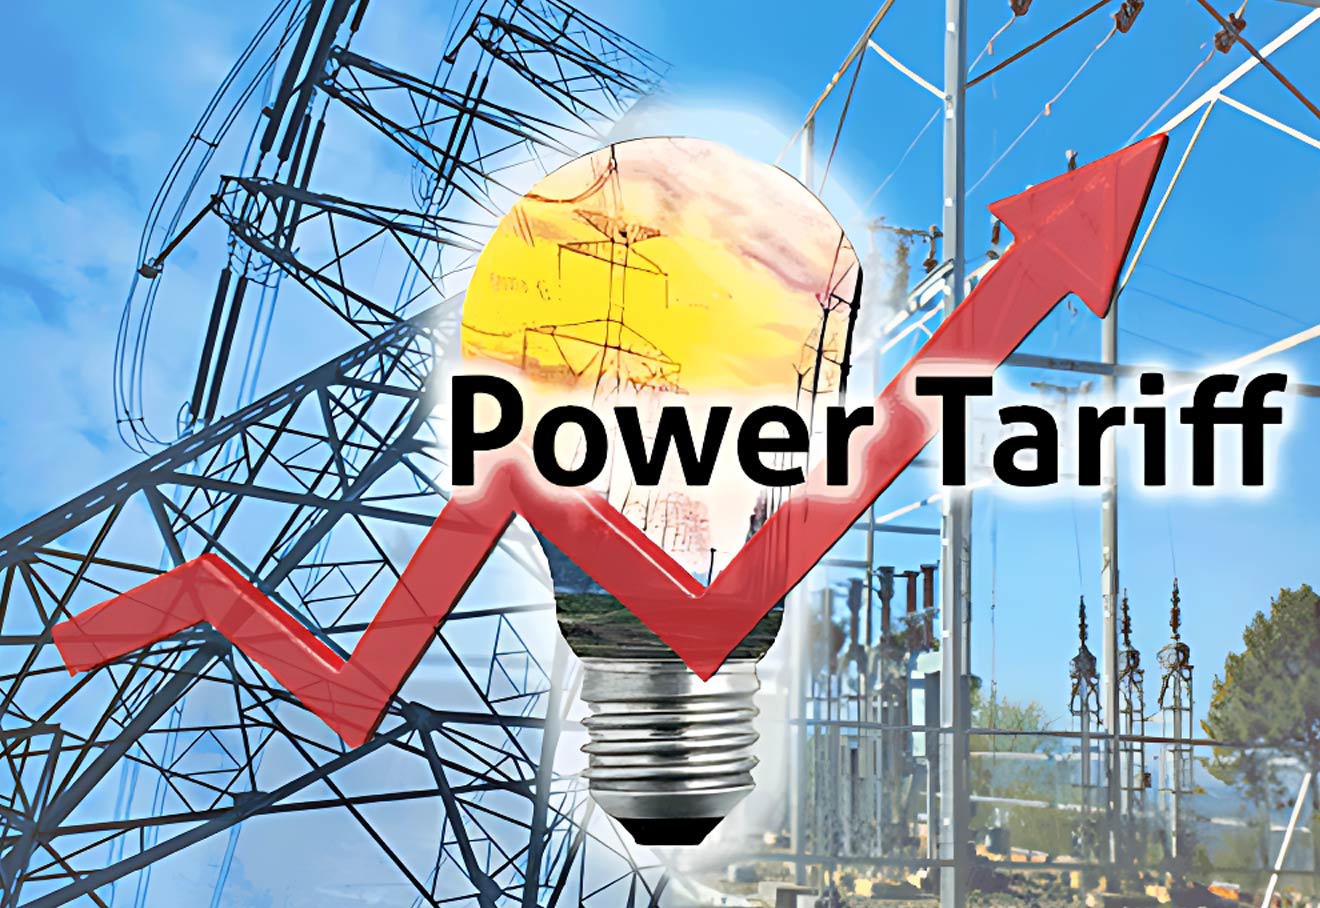 Industry Bodies In Tamil Nadu To Intensify Protest Over Electricity Tariff Hike